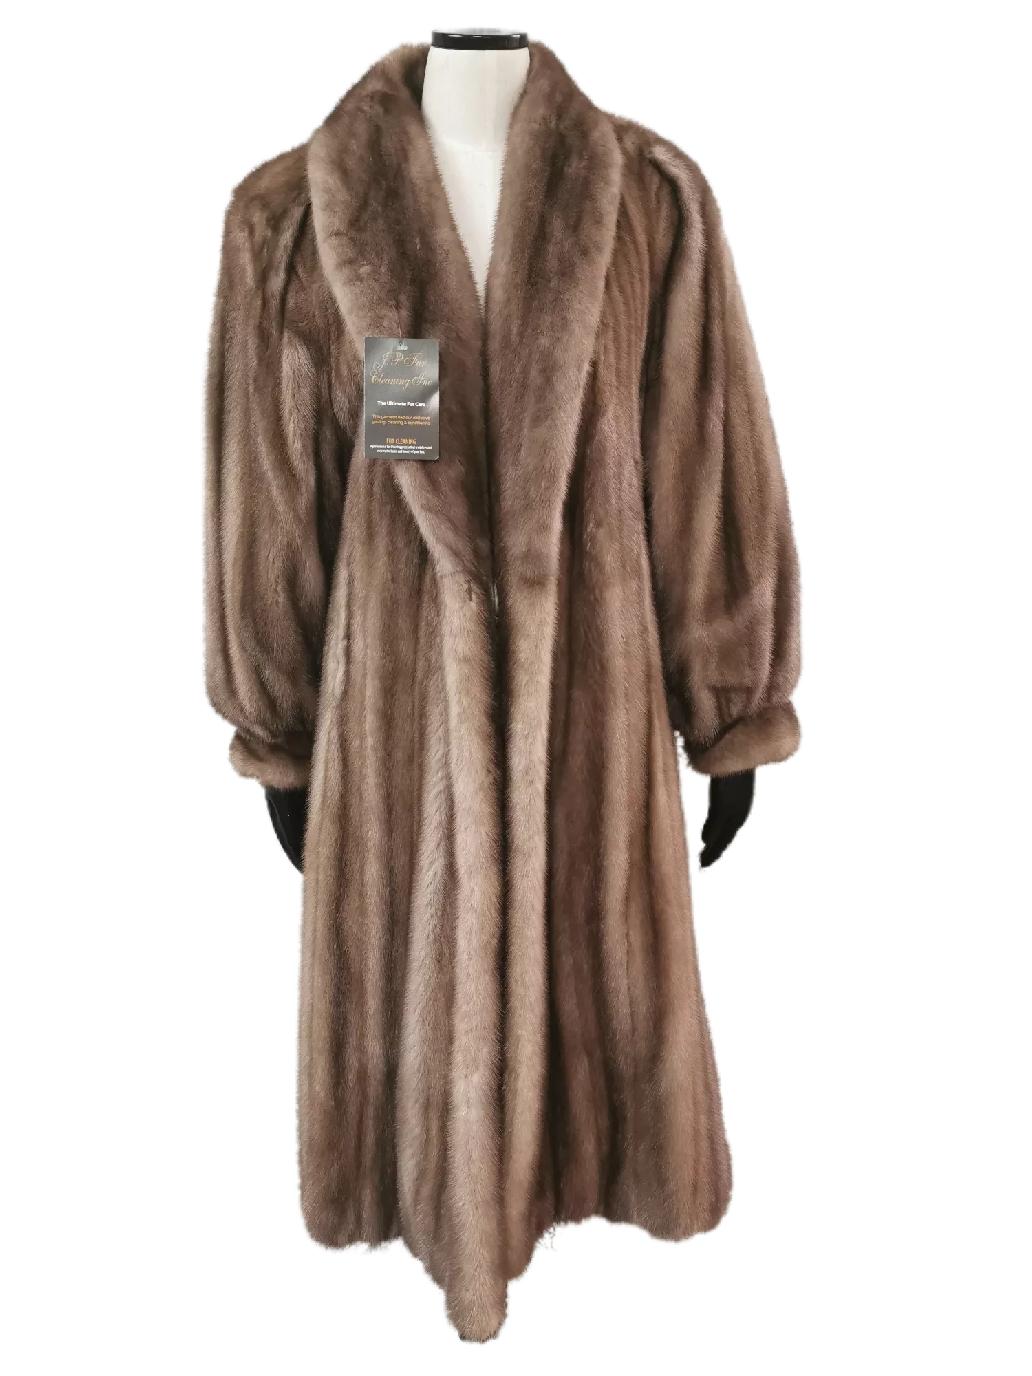 PRODUCT DESCRIPTION:

Brand new Christian Dior extremely rare Lutetia mink fur full length coat with fur belt and a beautiful collar

Condition: Like new

Closure: Hooks & Eyes

Color: Lutetia (stone grey)

Material: Lutetia mink

Garment type: